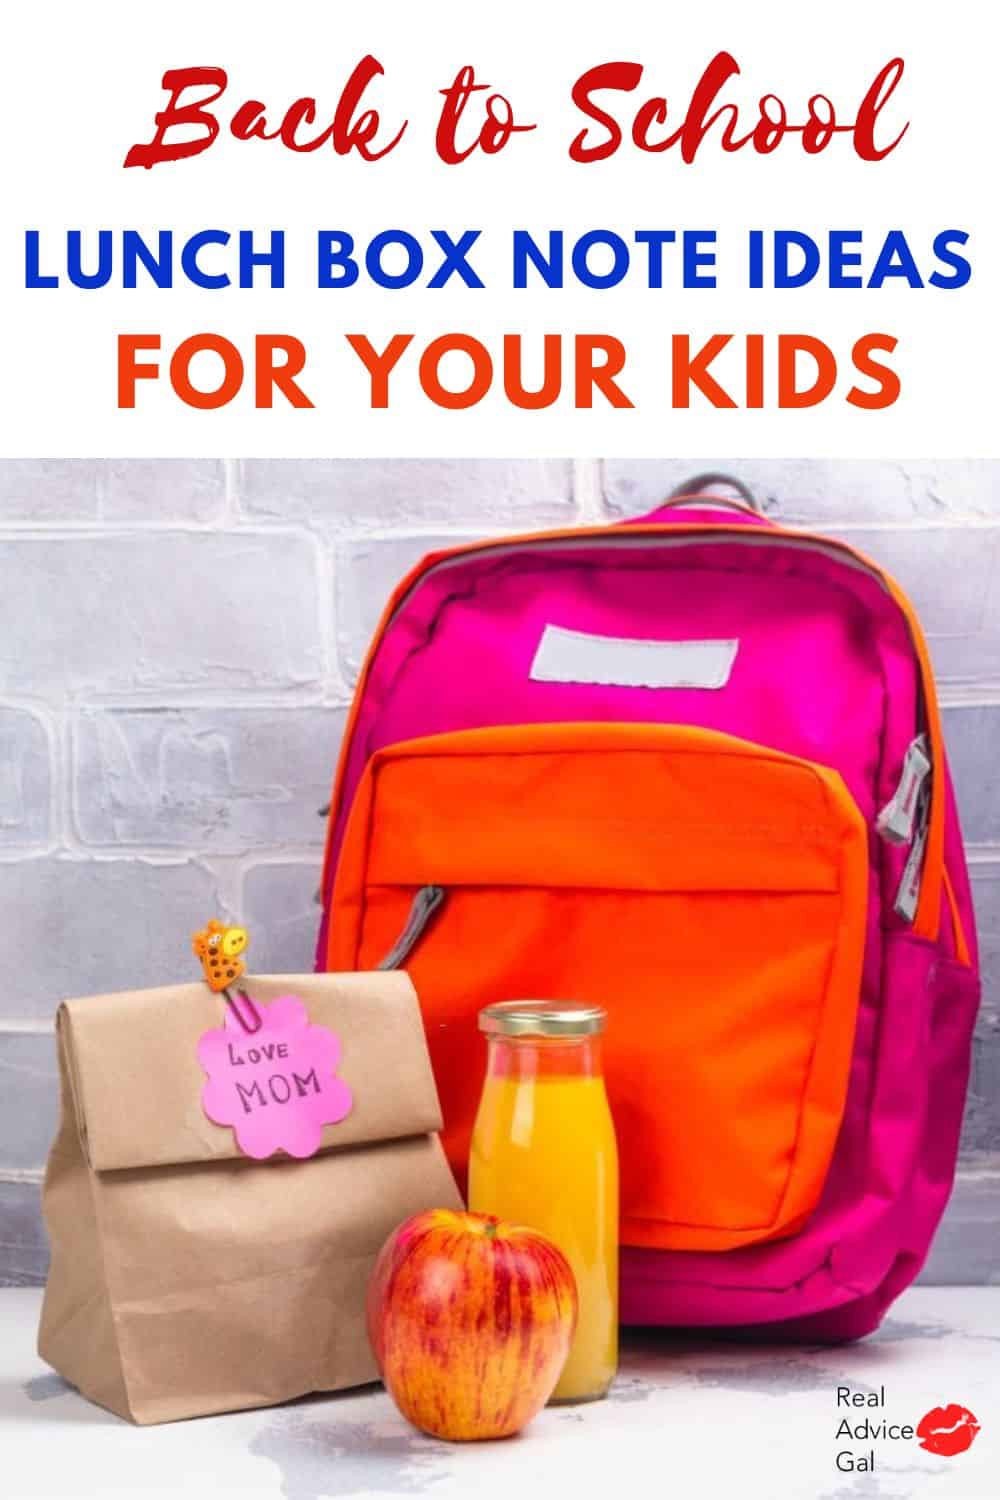 https://realadvicegal.com/wp-content/uploads/2022/08/lunch-box-notes-boys.jpg